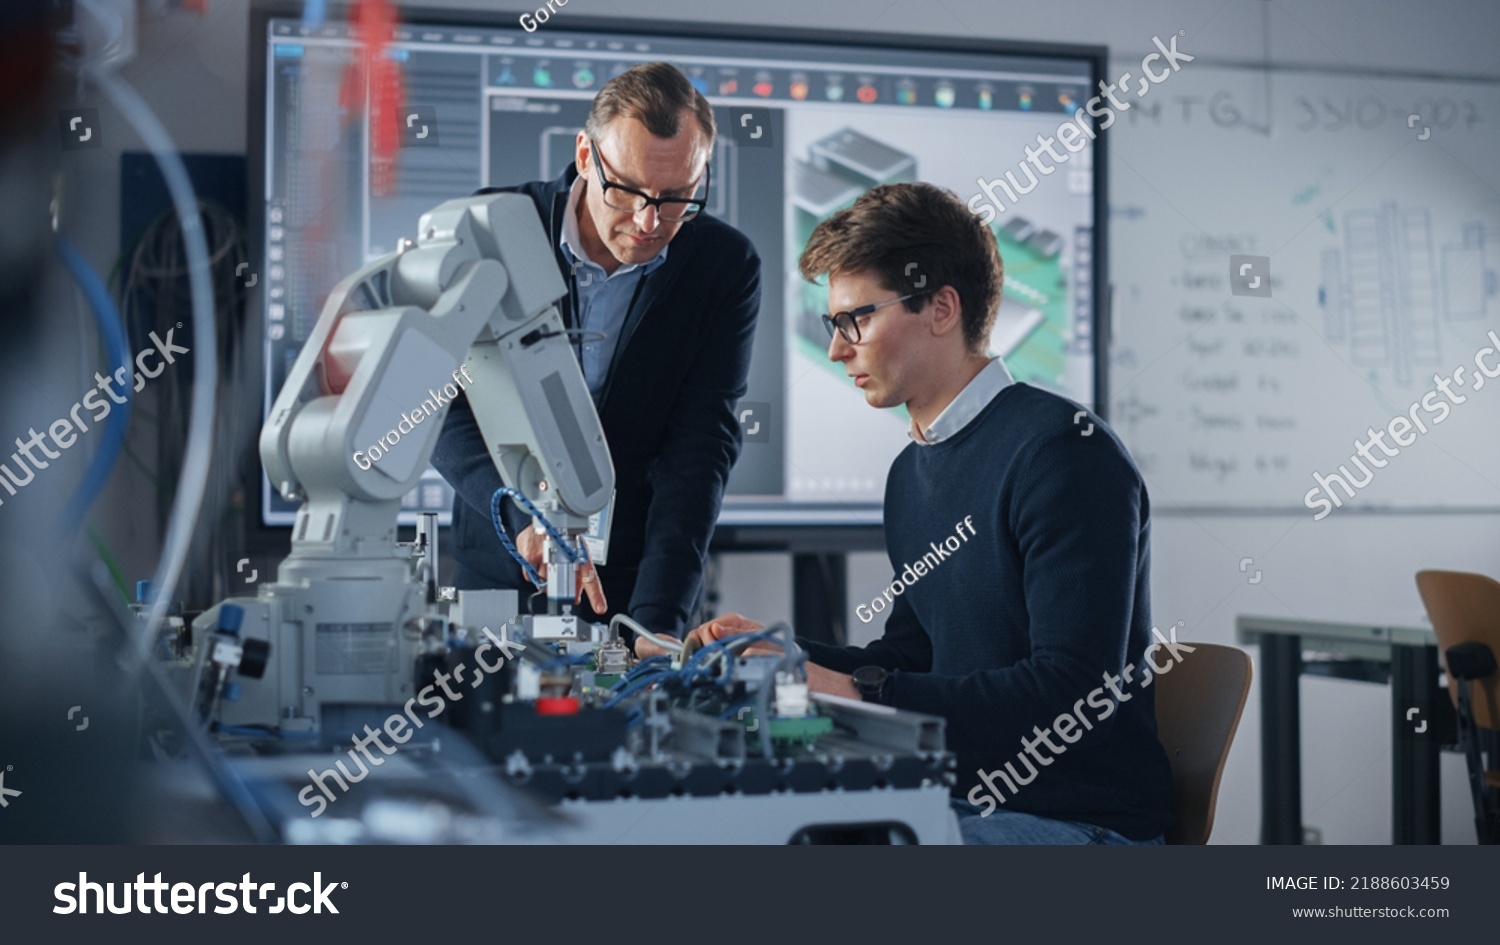 Product Supervisor Consults Young Engineer Working with Optimization of Robot Arm. People Doing Robotic Hand Maintenance Ideas. High-Tech Science and Engineering Concept. Medium Shot #2188603459